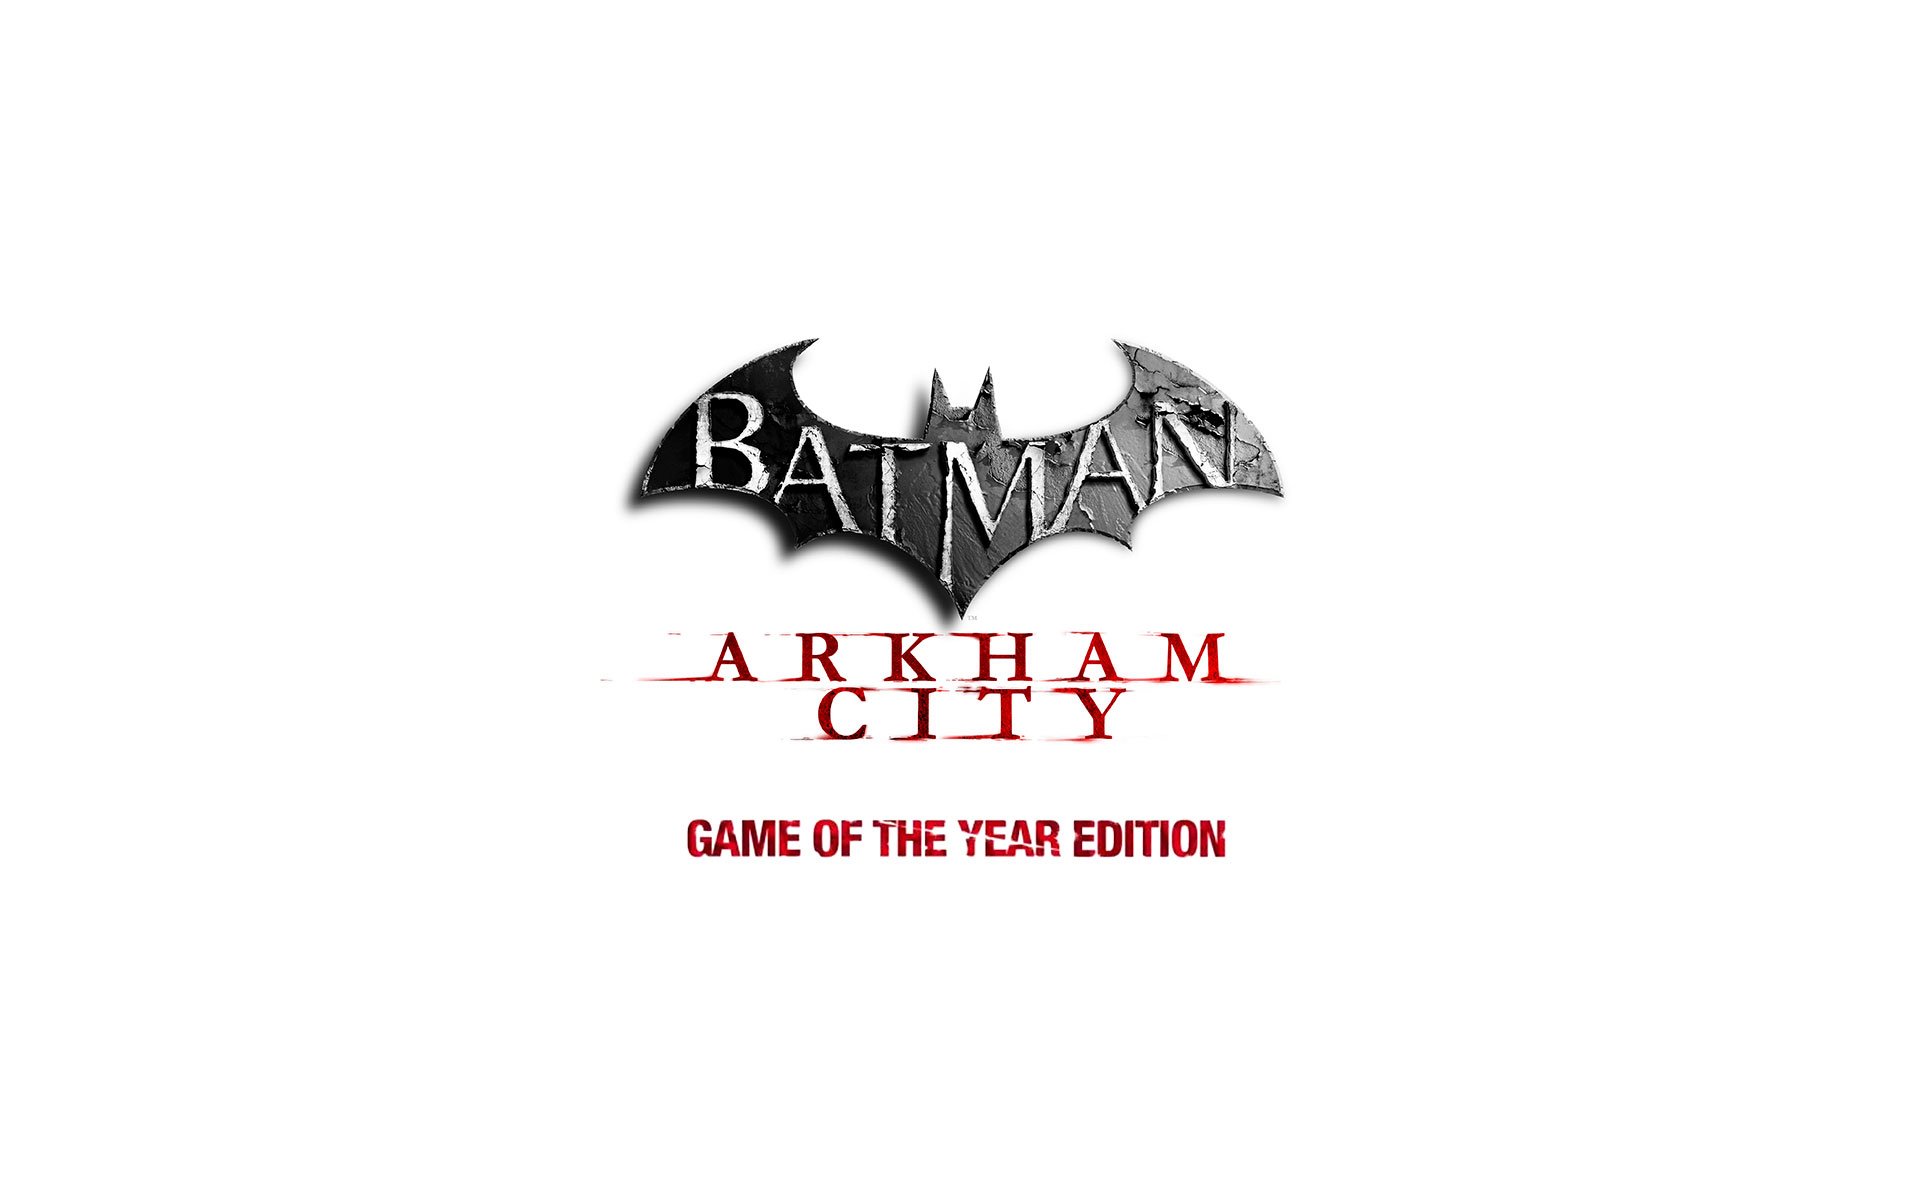  Batman: Arkham City - Game of the Year Edition